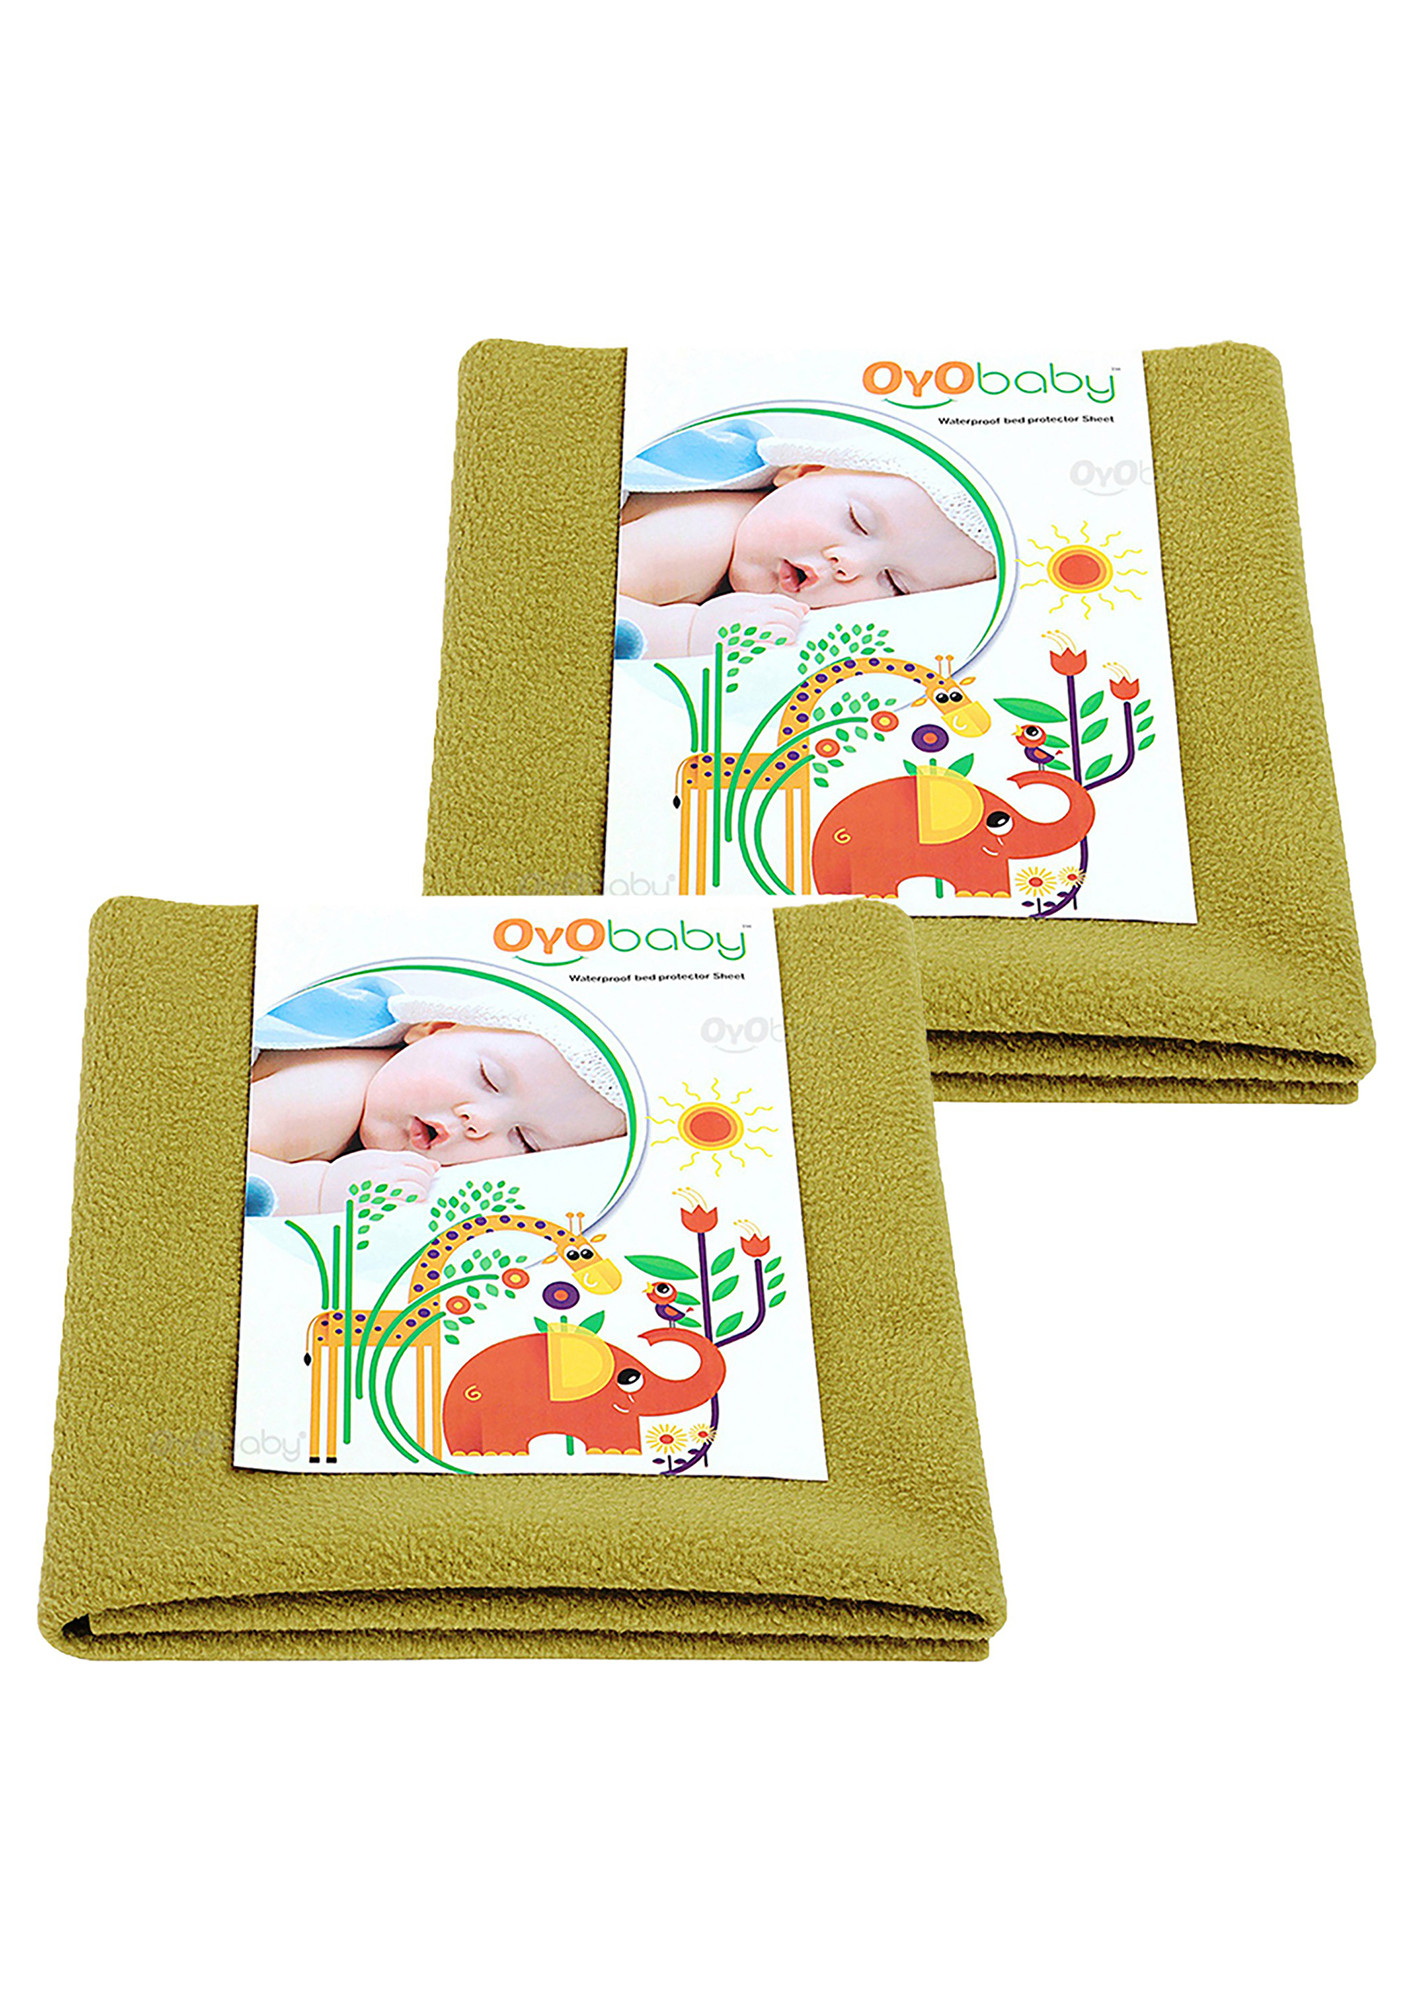 Oyo Baby Cotton Baby Bed Protecting Mat (Gold, Medium, Pack of 2)-OB-2026-G